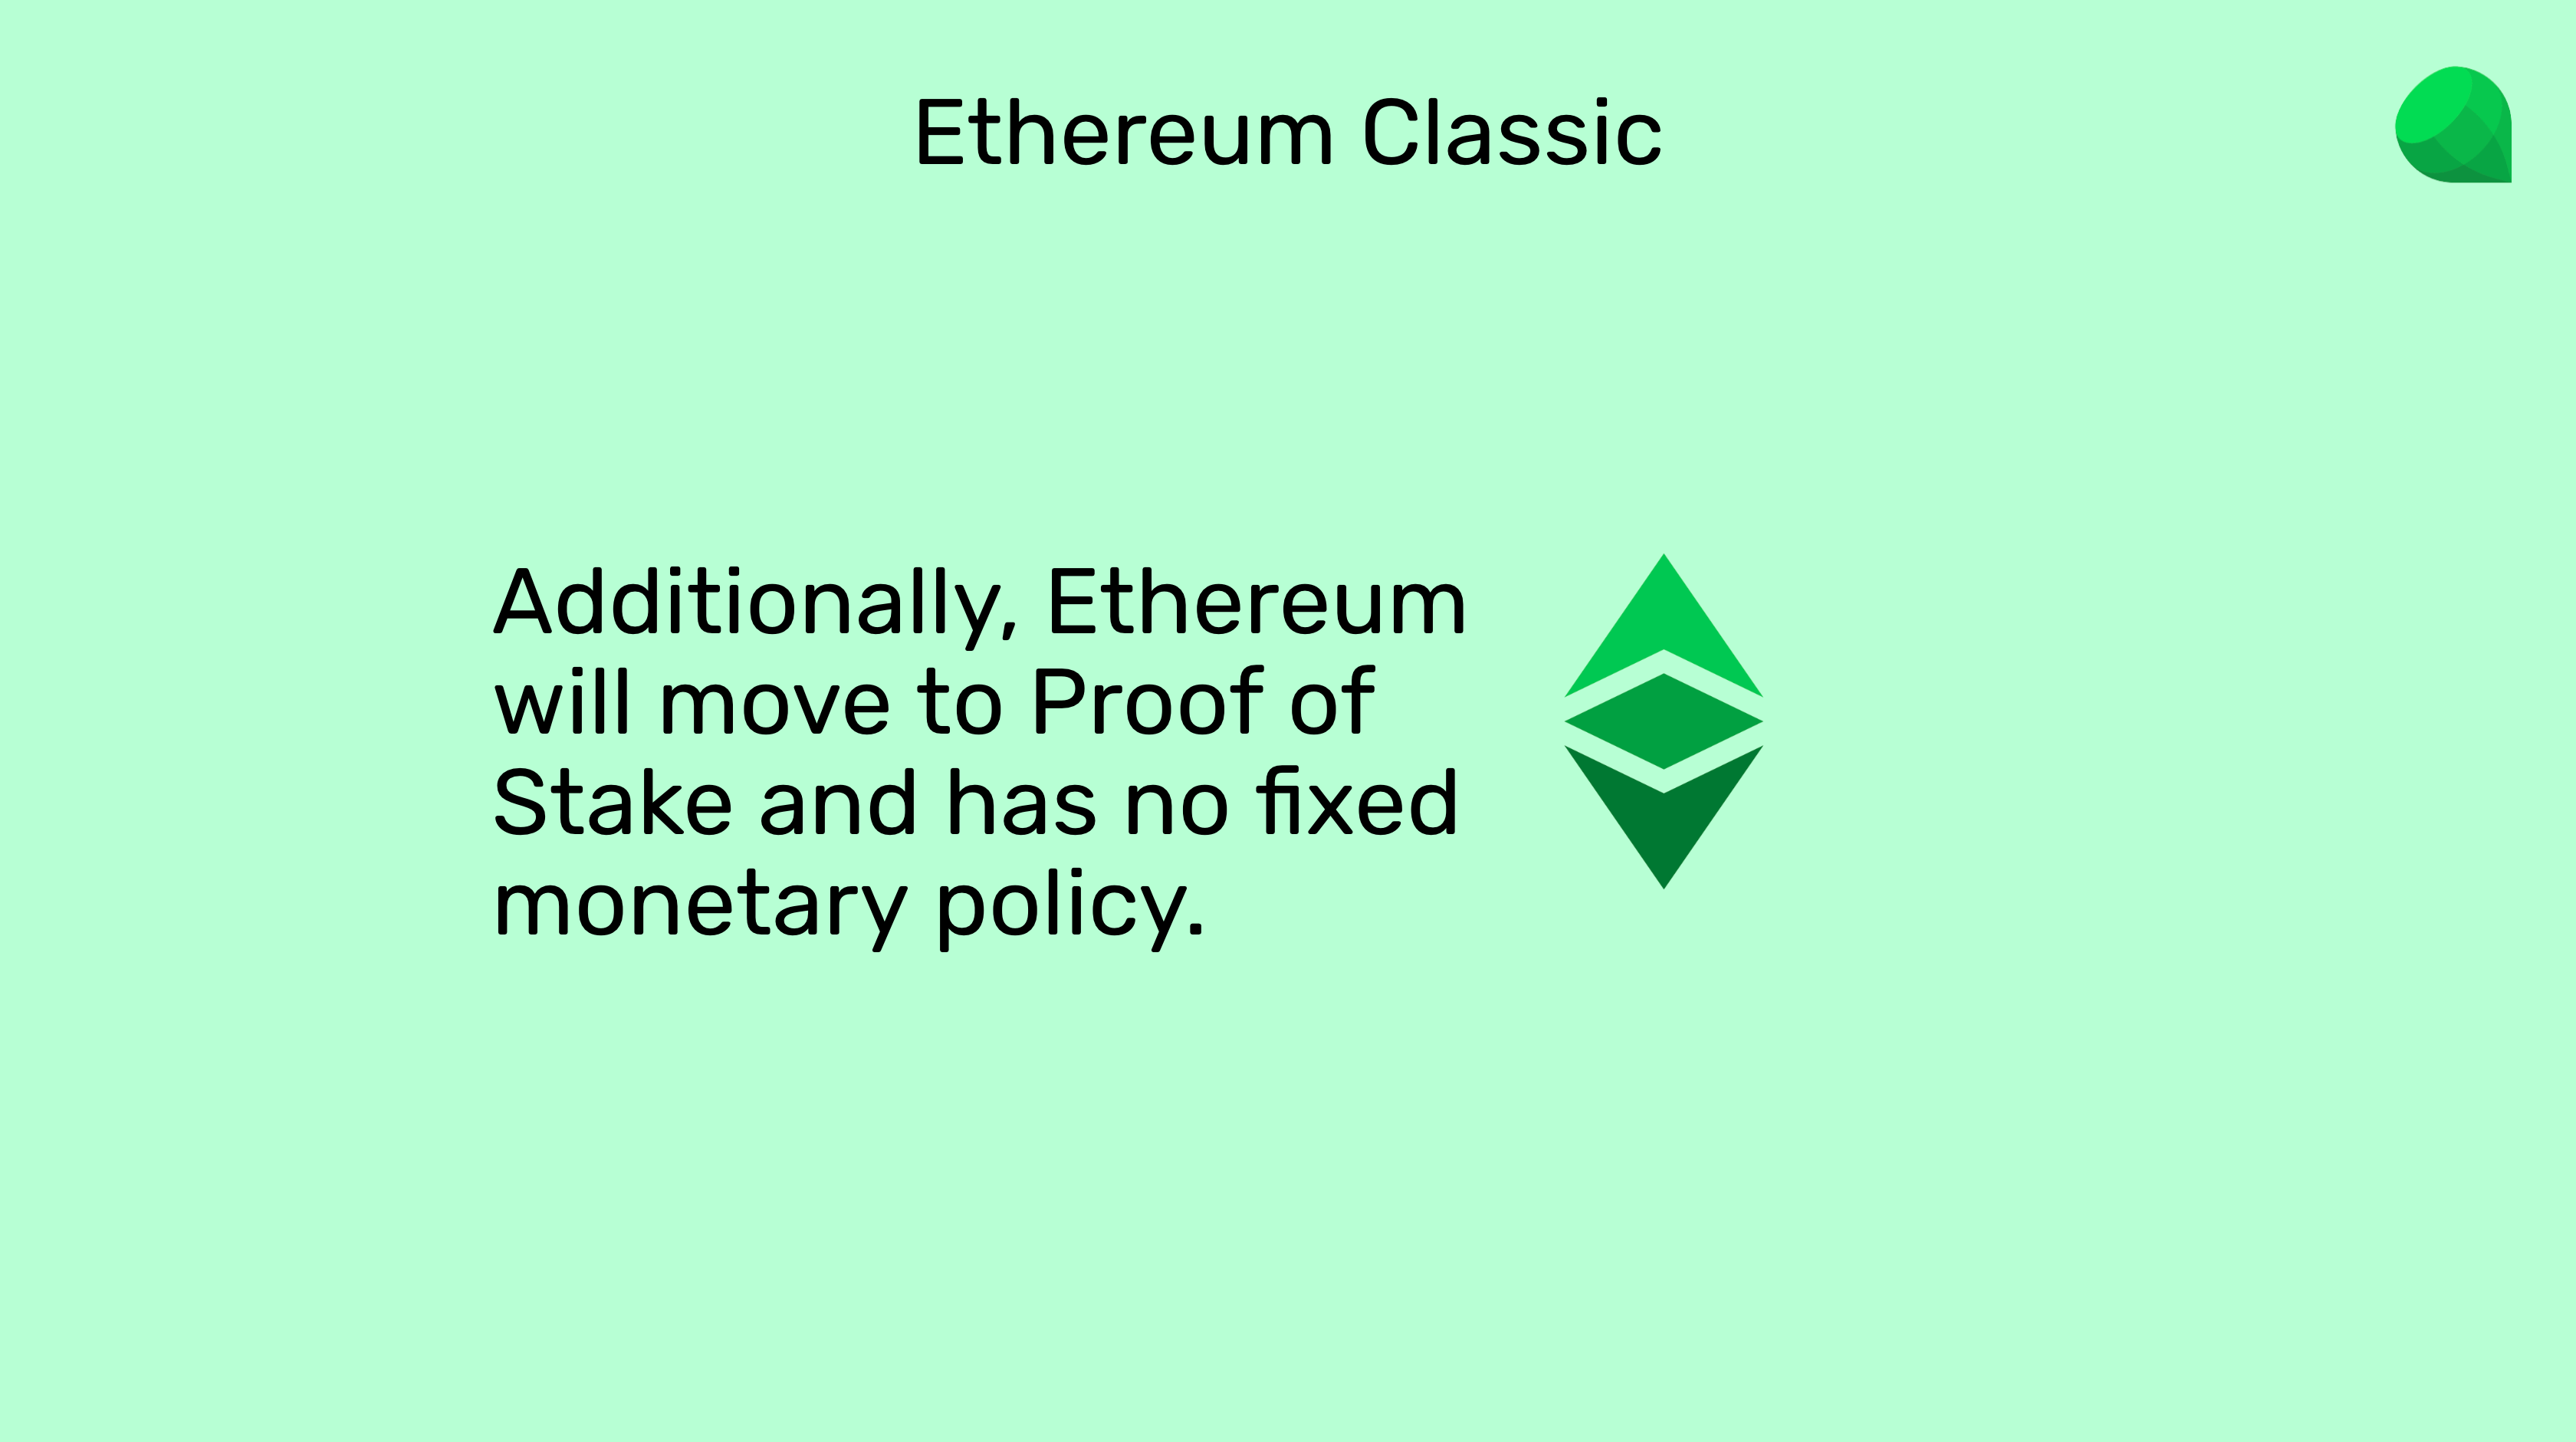 Ethereum will move to proof of stake.